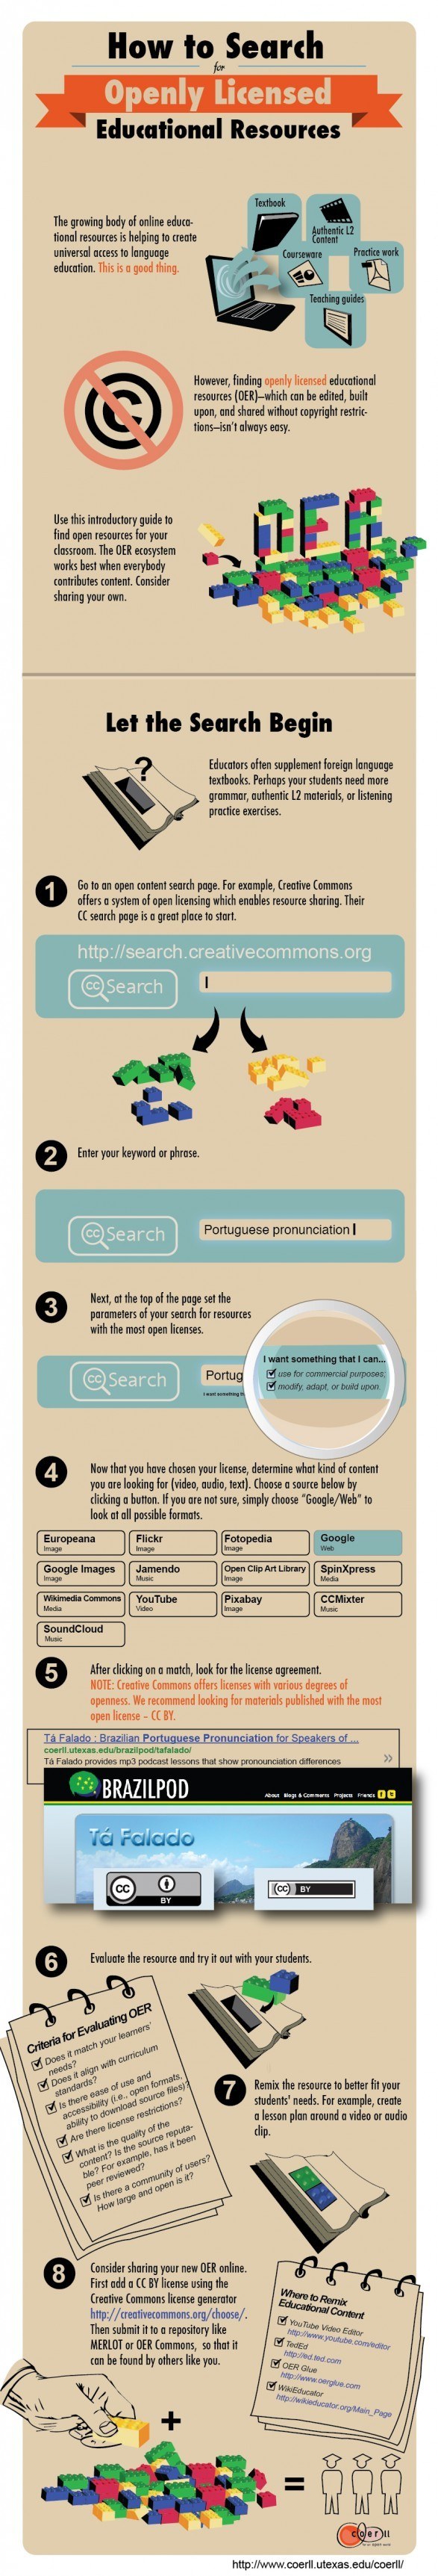 How-to-Search-for-Open-Educational-Resources-Infographic